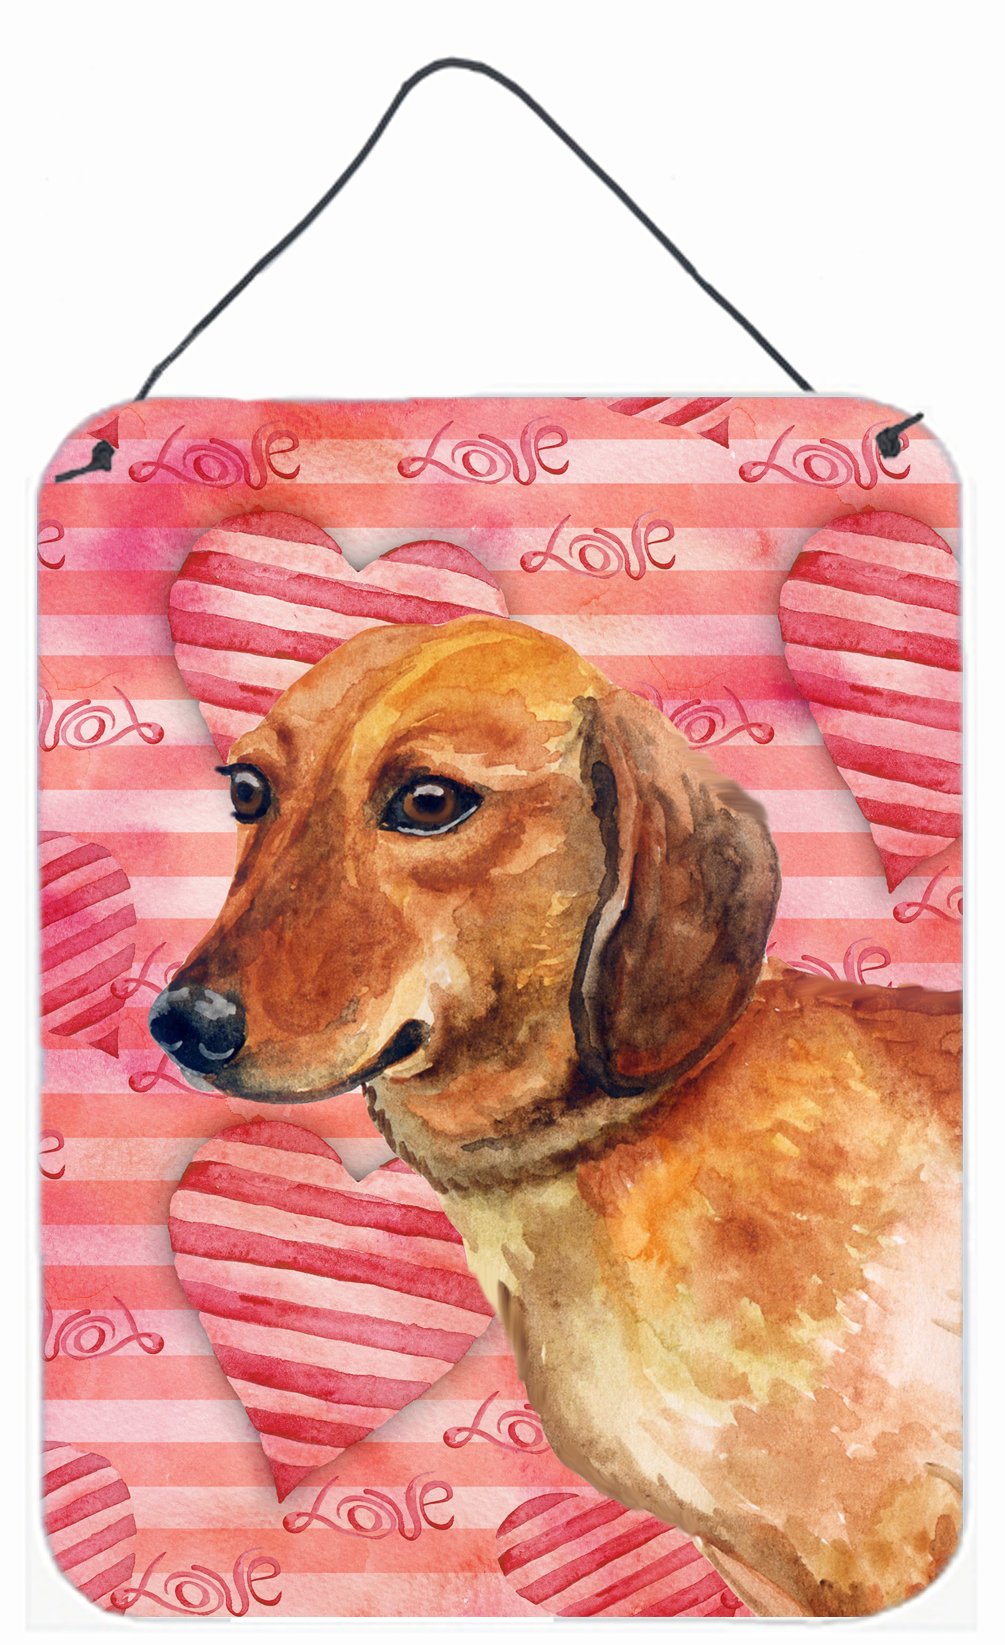 Dachshund Love Wall or Door Hanging Prints BB9739DS1216 by Caroline's Treasures